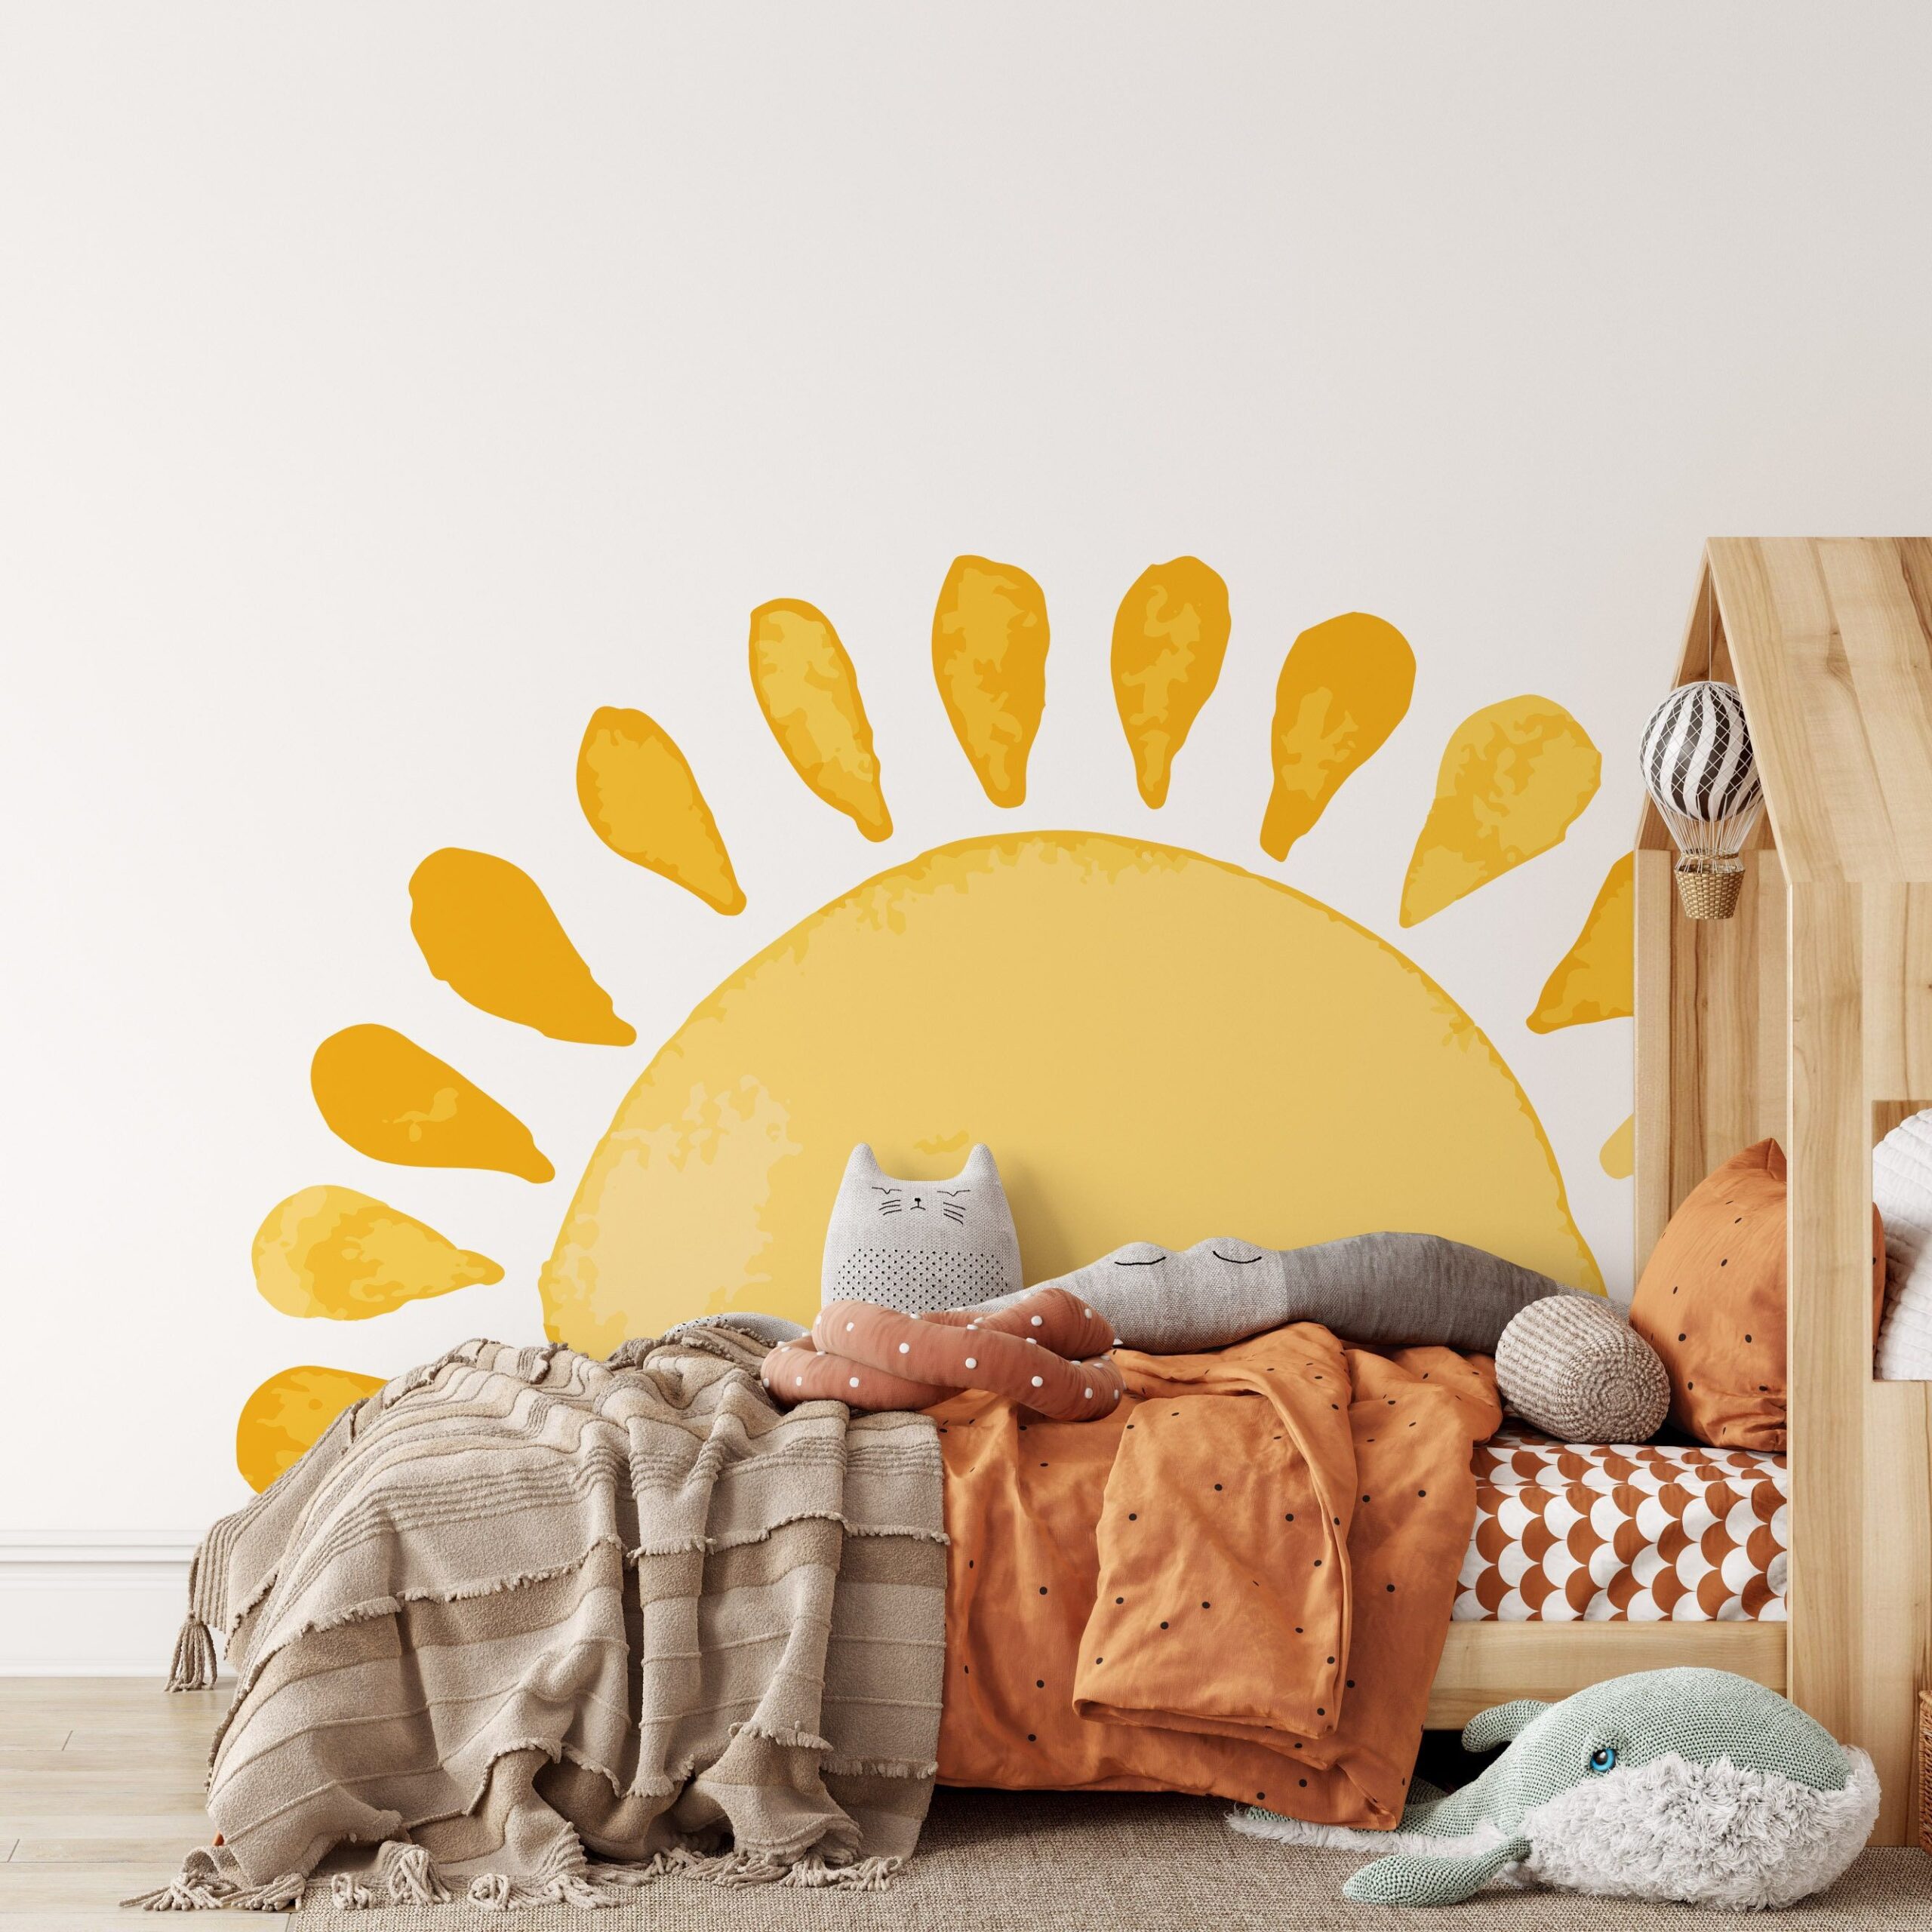 Bright Wall Stickers Create a Vibrant Space with Colorful Wall Decals